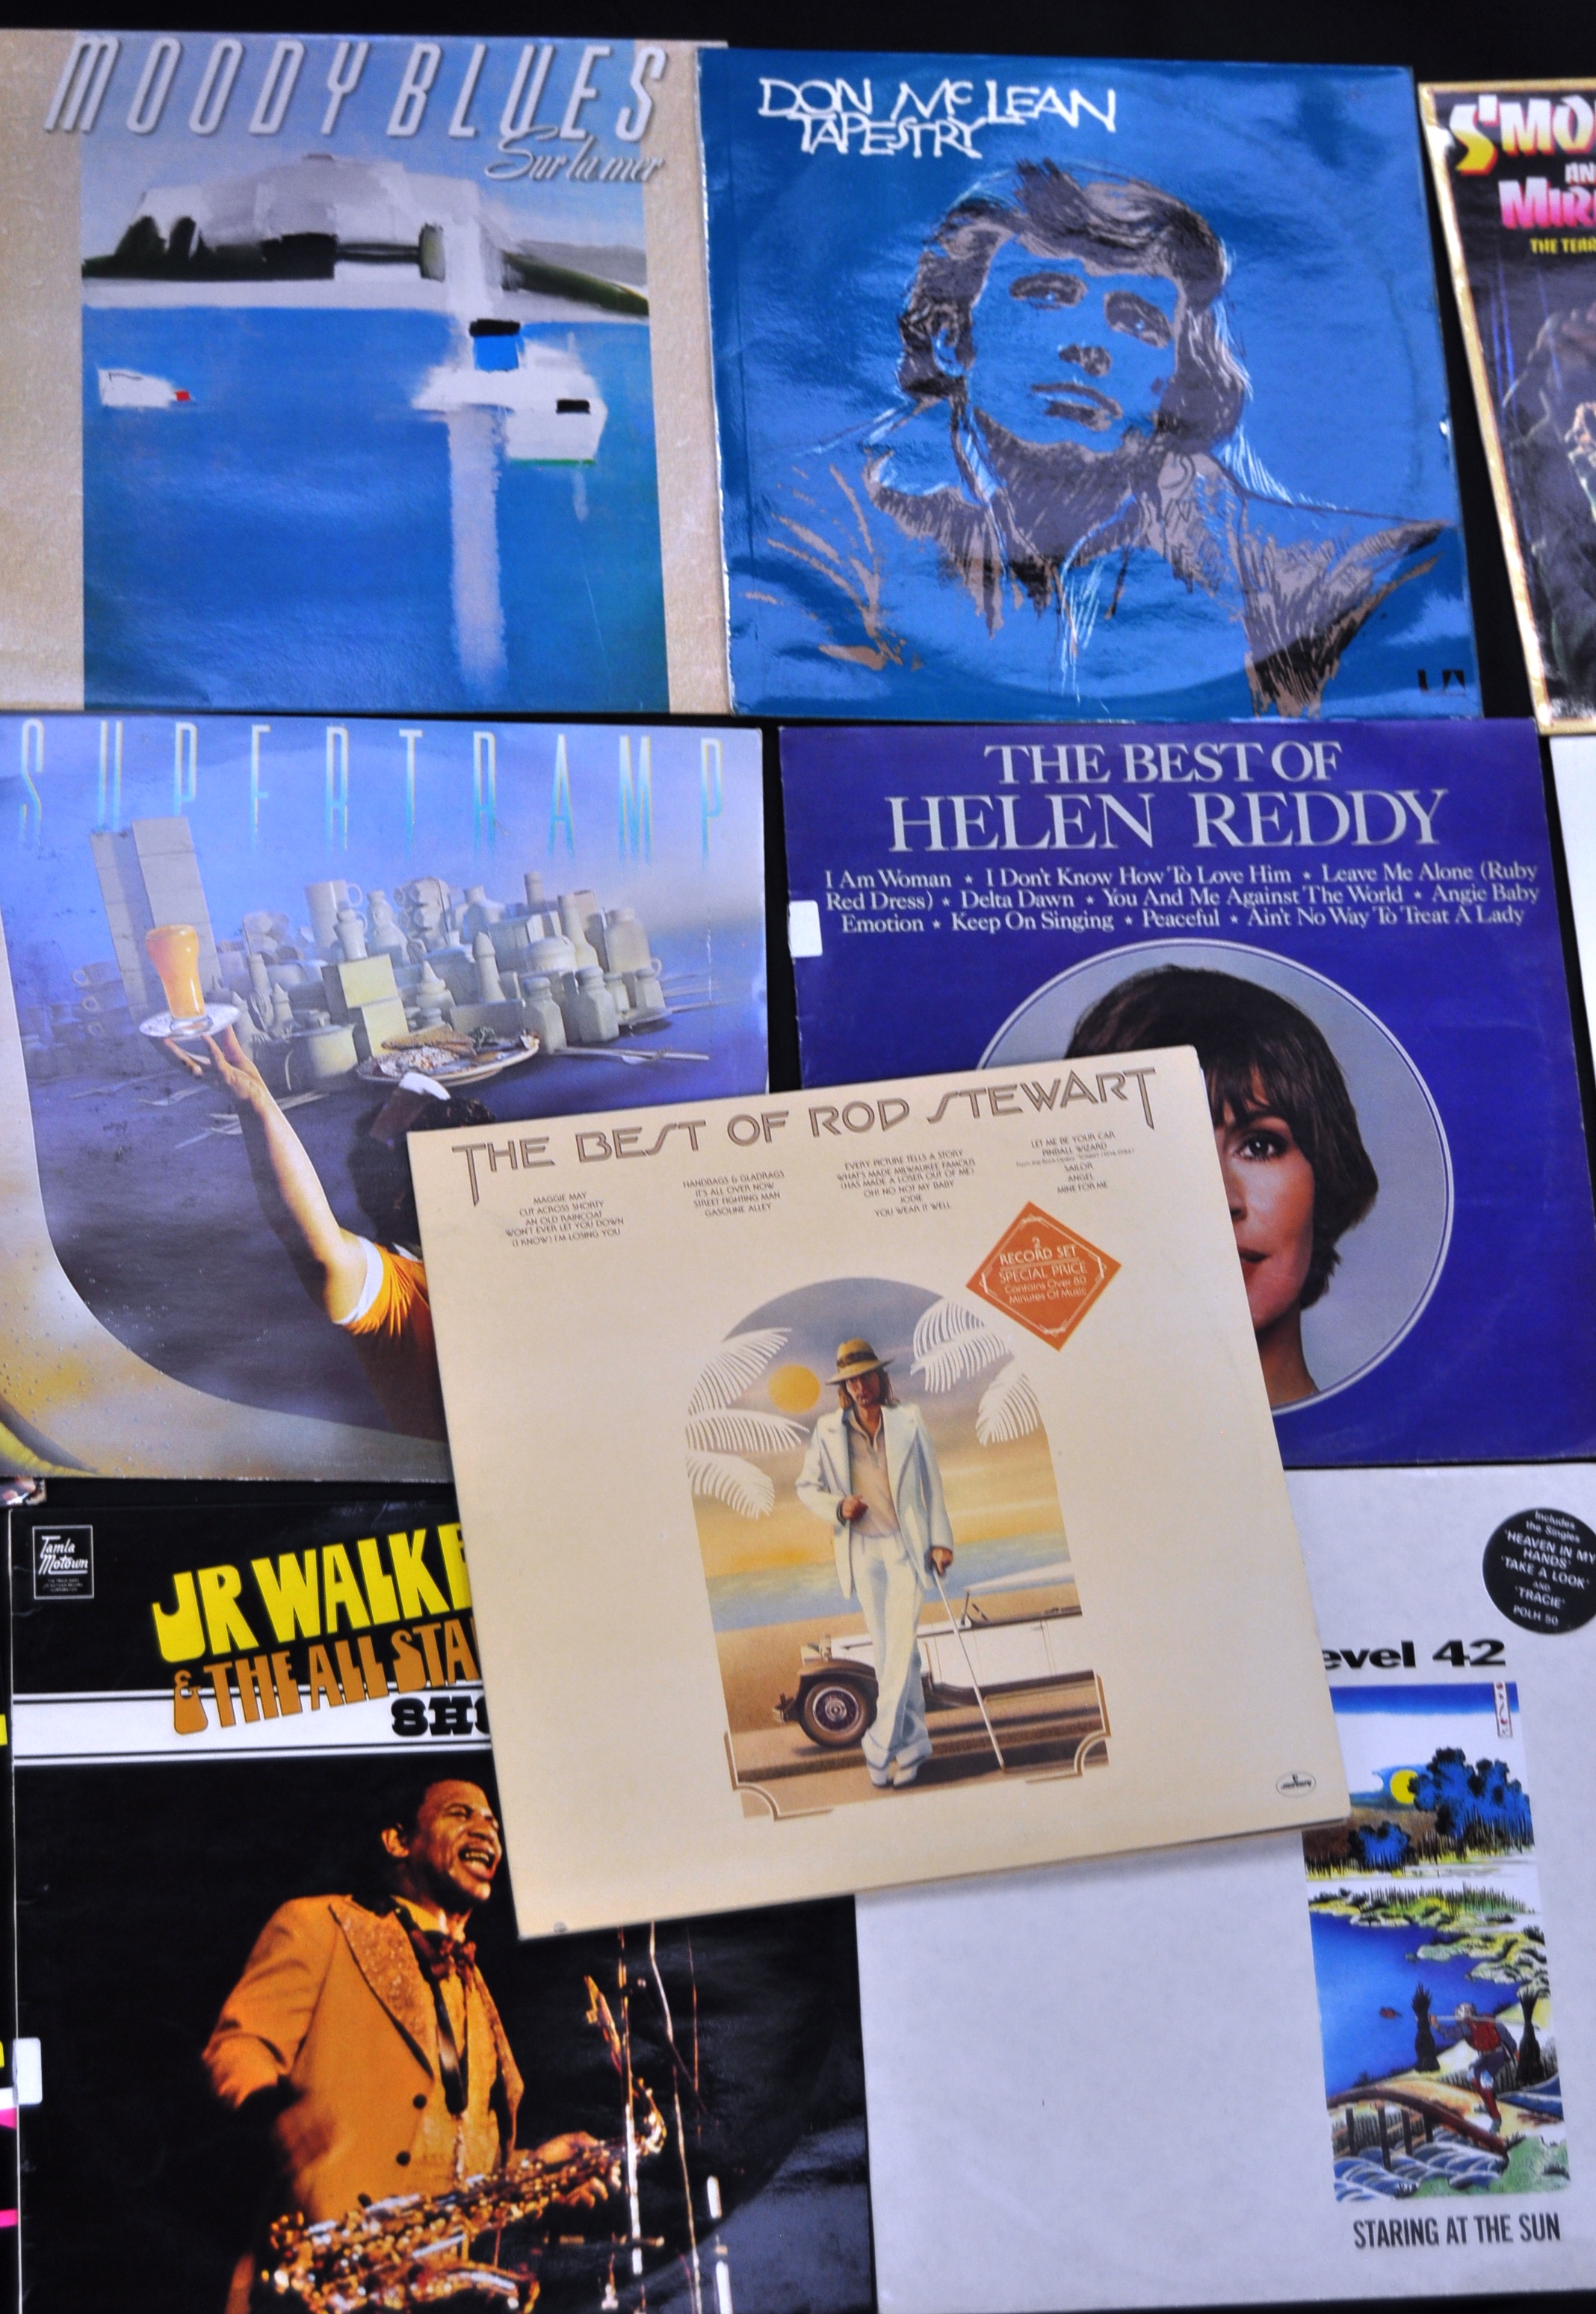 ROCK / NEW WAVE / PUNK / MOTOWN - GROUP OF RECORD ALBUMS - Image 4 of 6